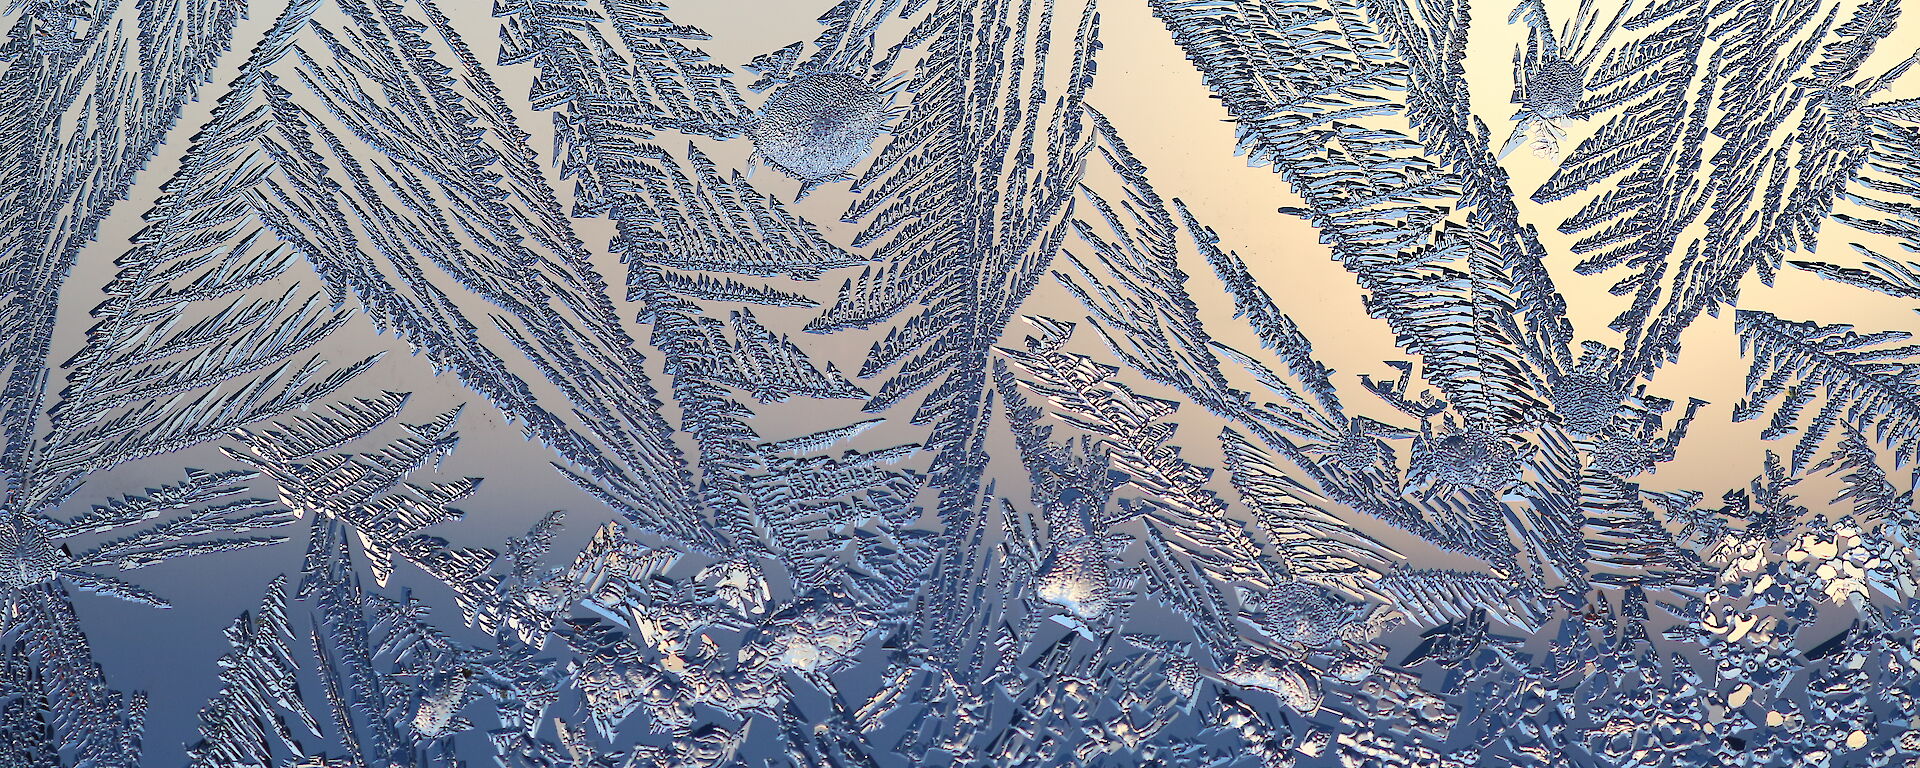 Ice patterns on the glass